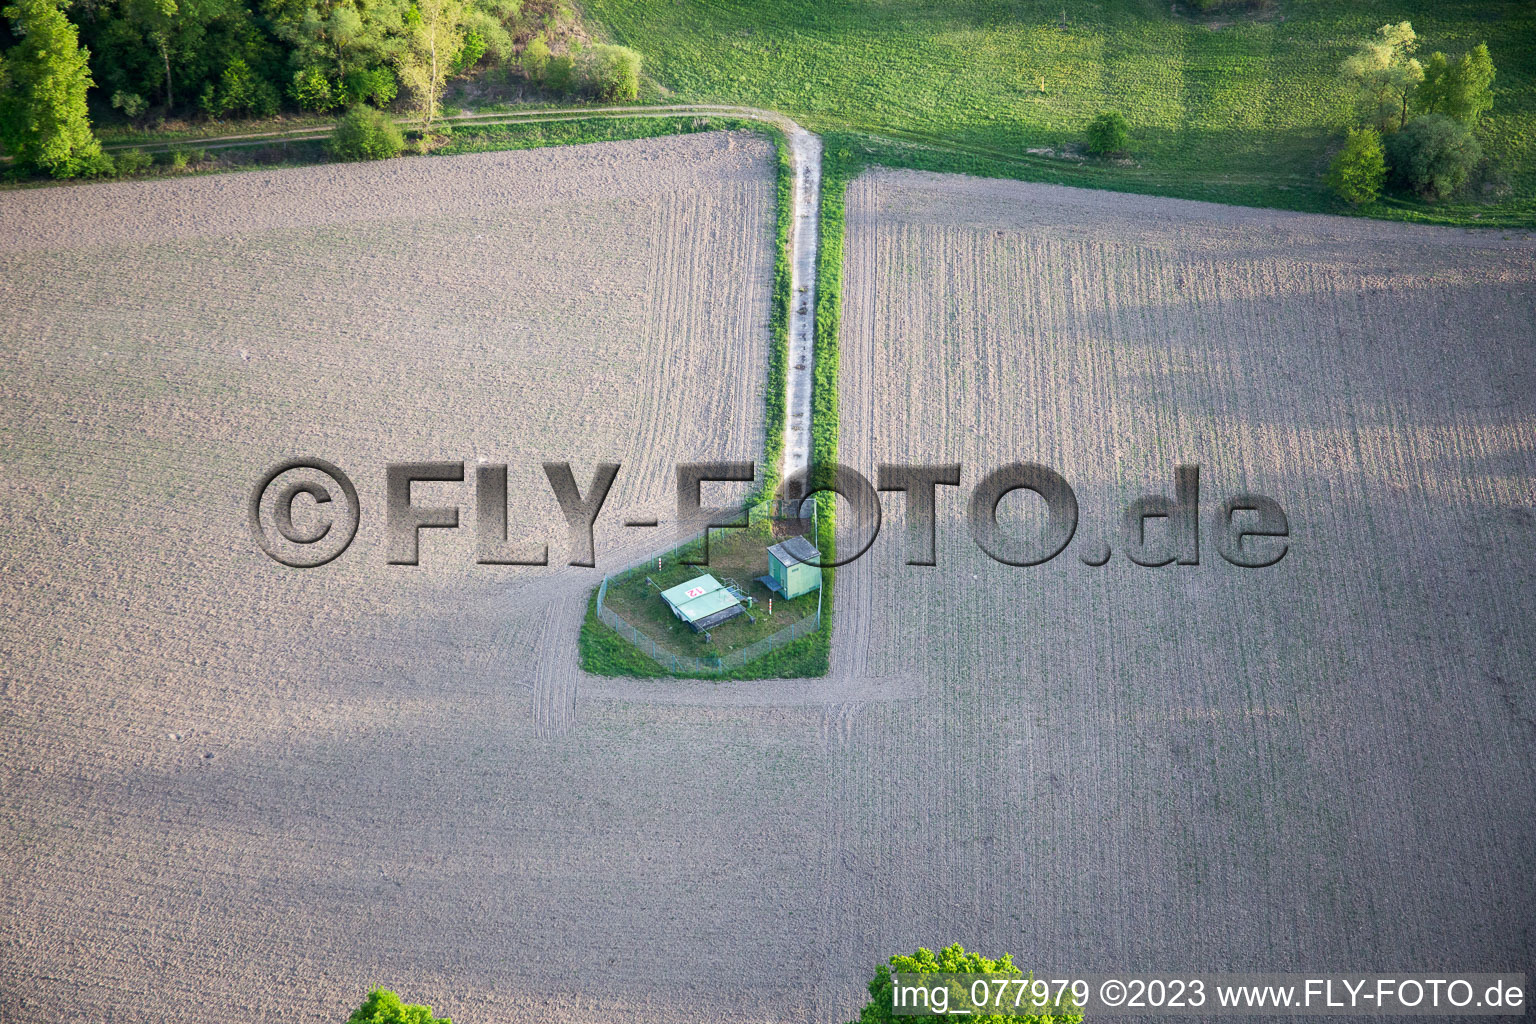 Neuburg in the state Rhineland-Palatinate, Germany out of the air